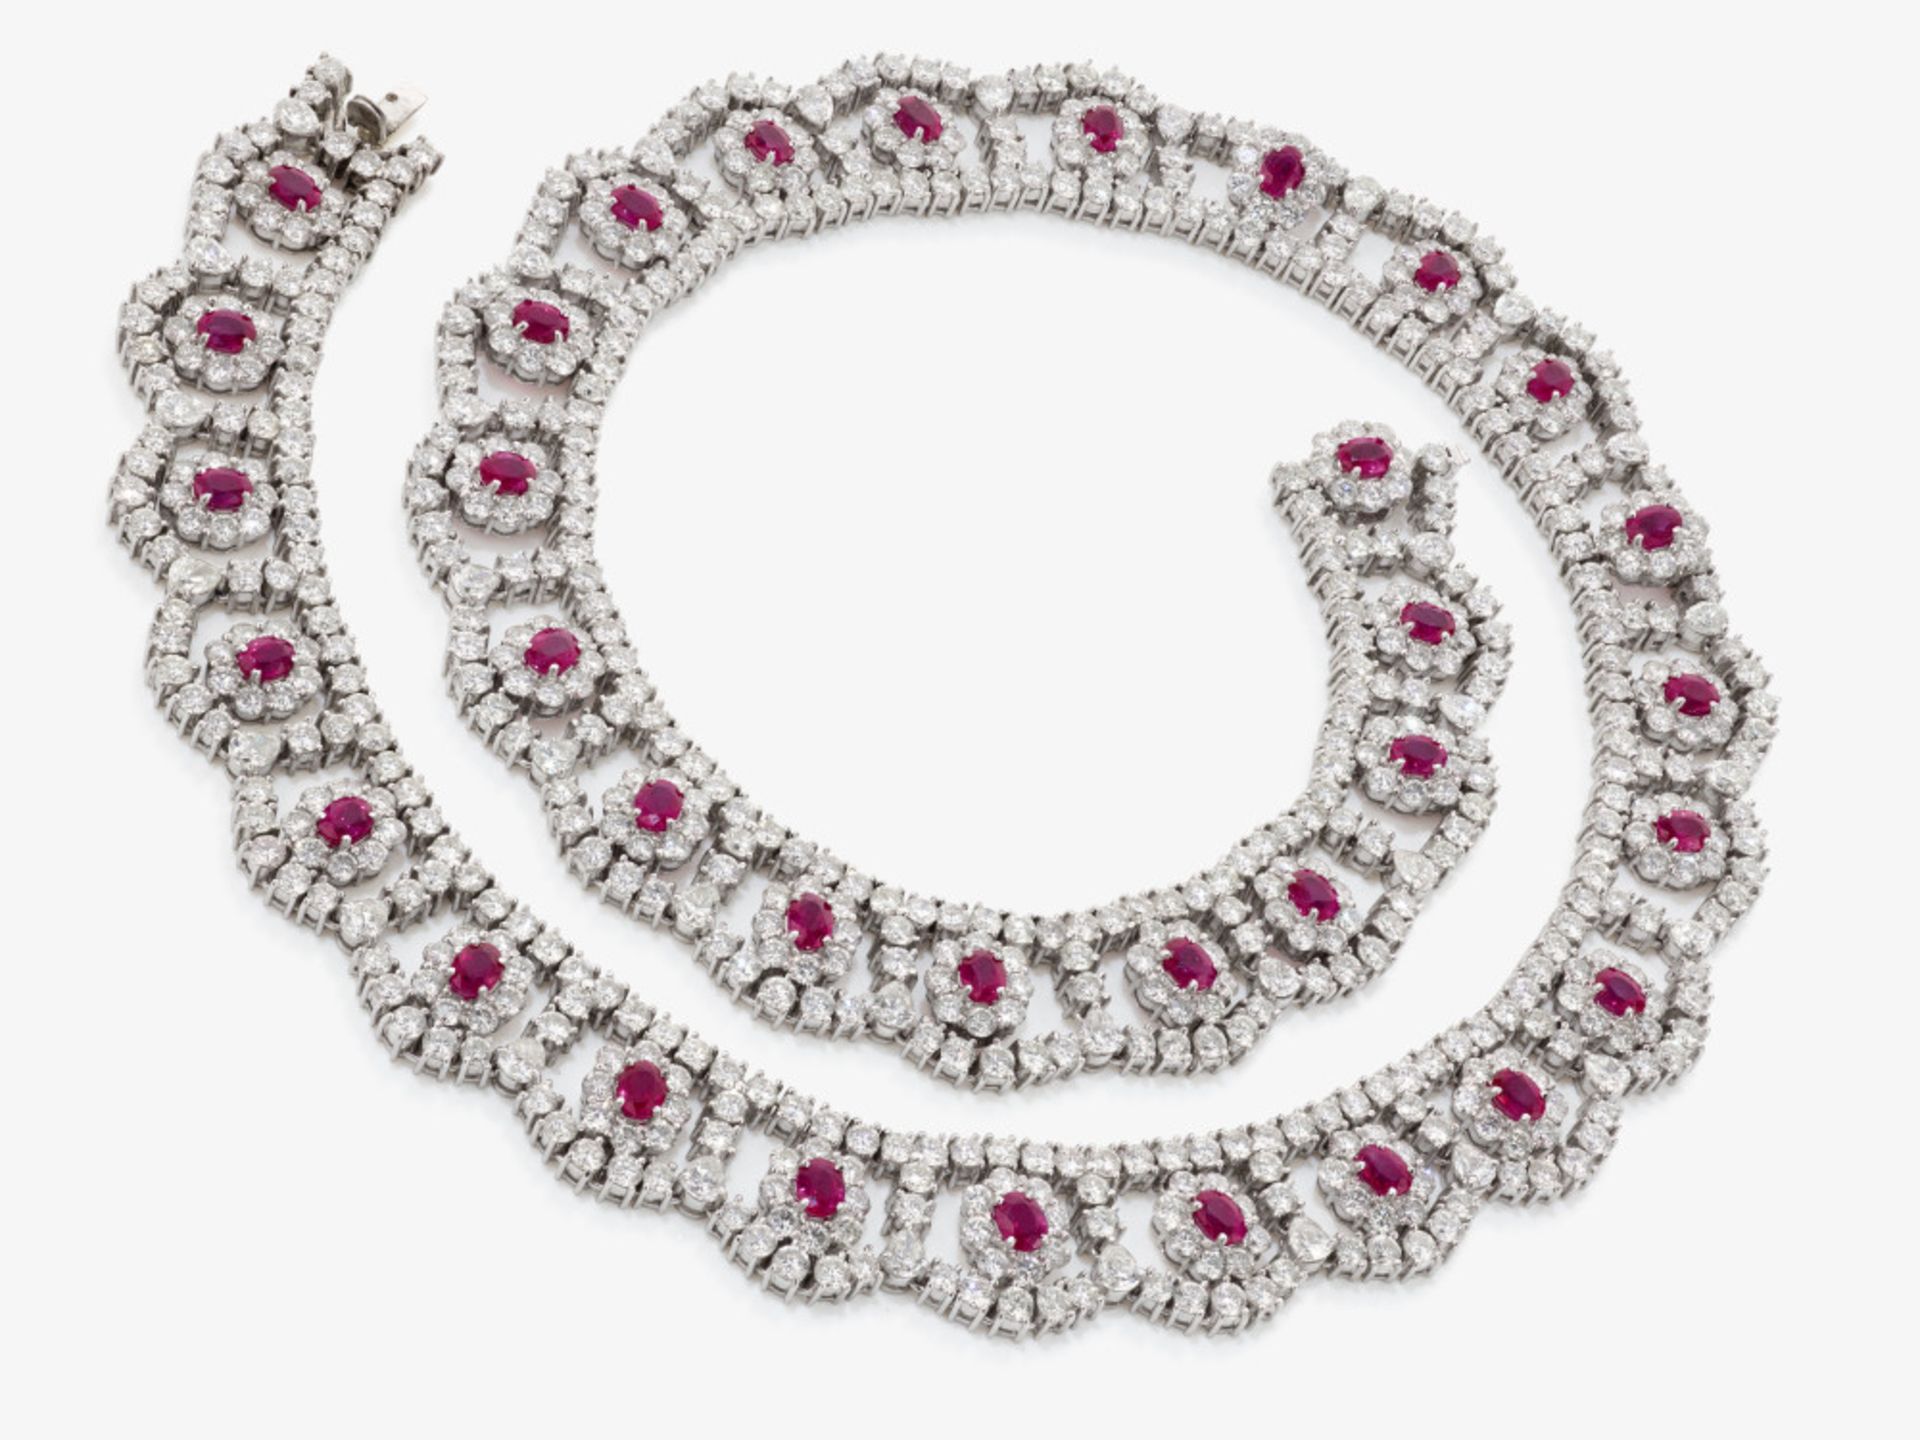 A necklace with rubies and brilliant-cut diamonds